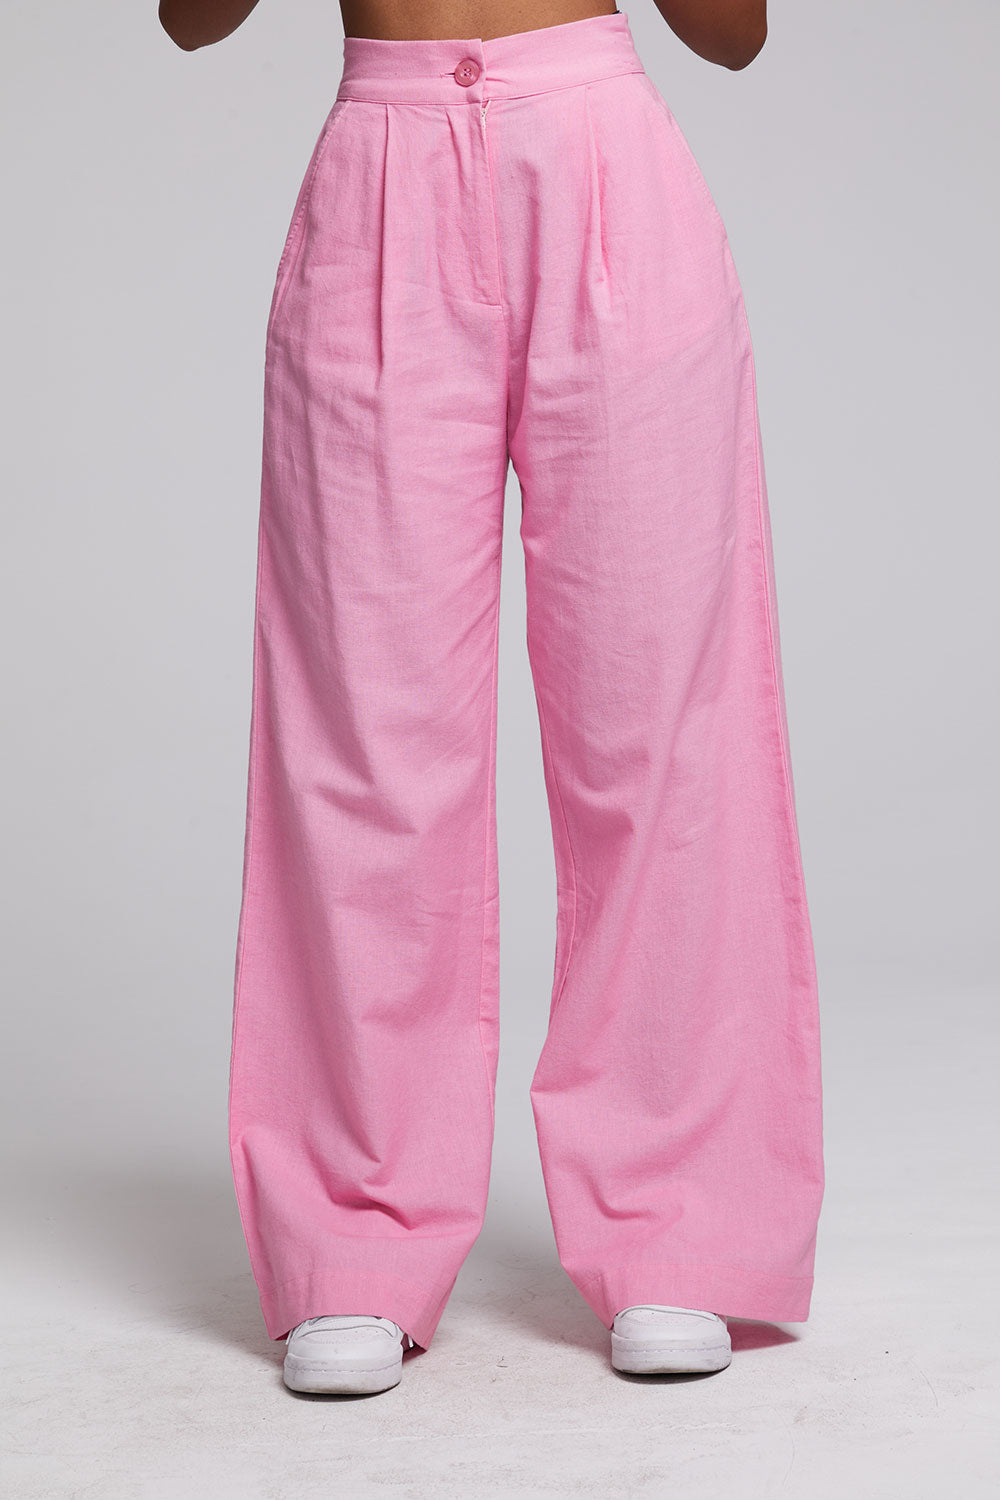 Chaser | Campania Trousers | Rosewater